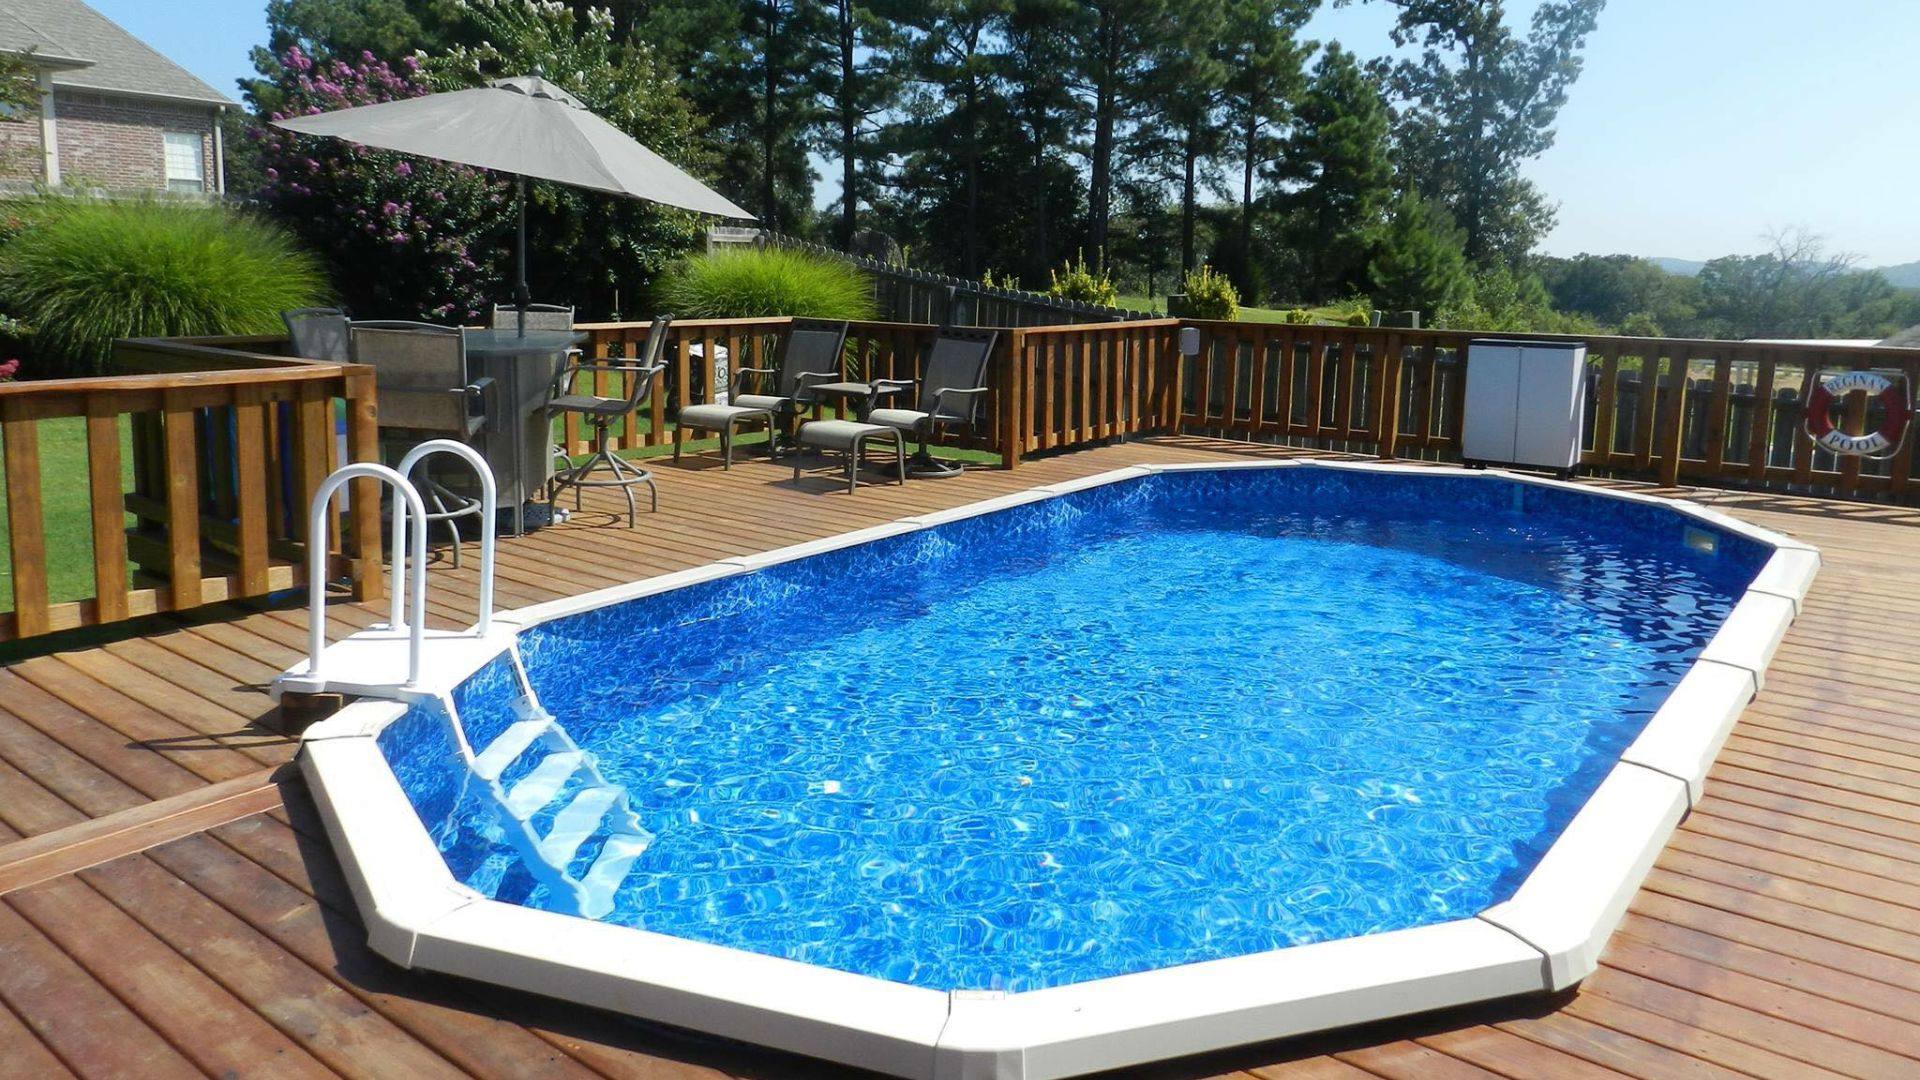 Doughboy Pool with a Wooden Deck